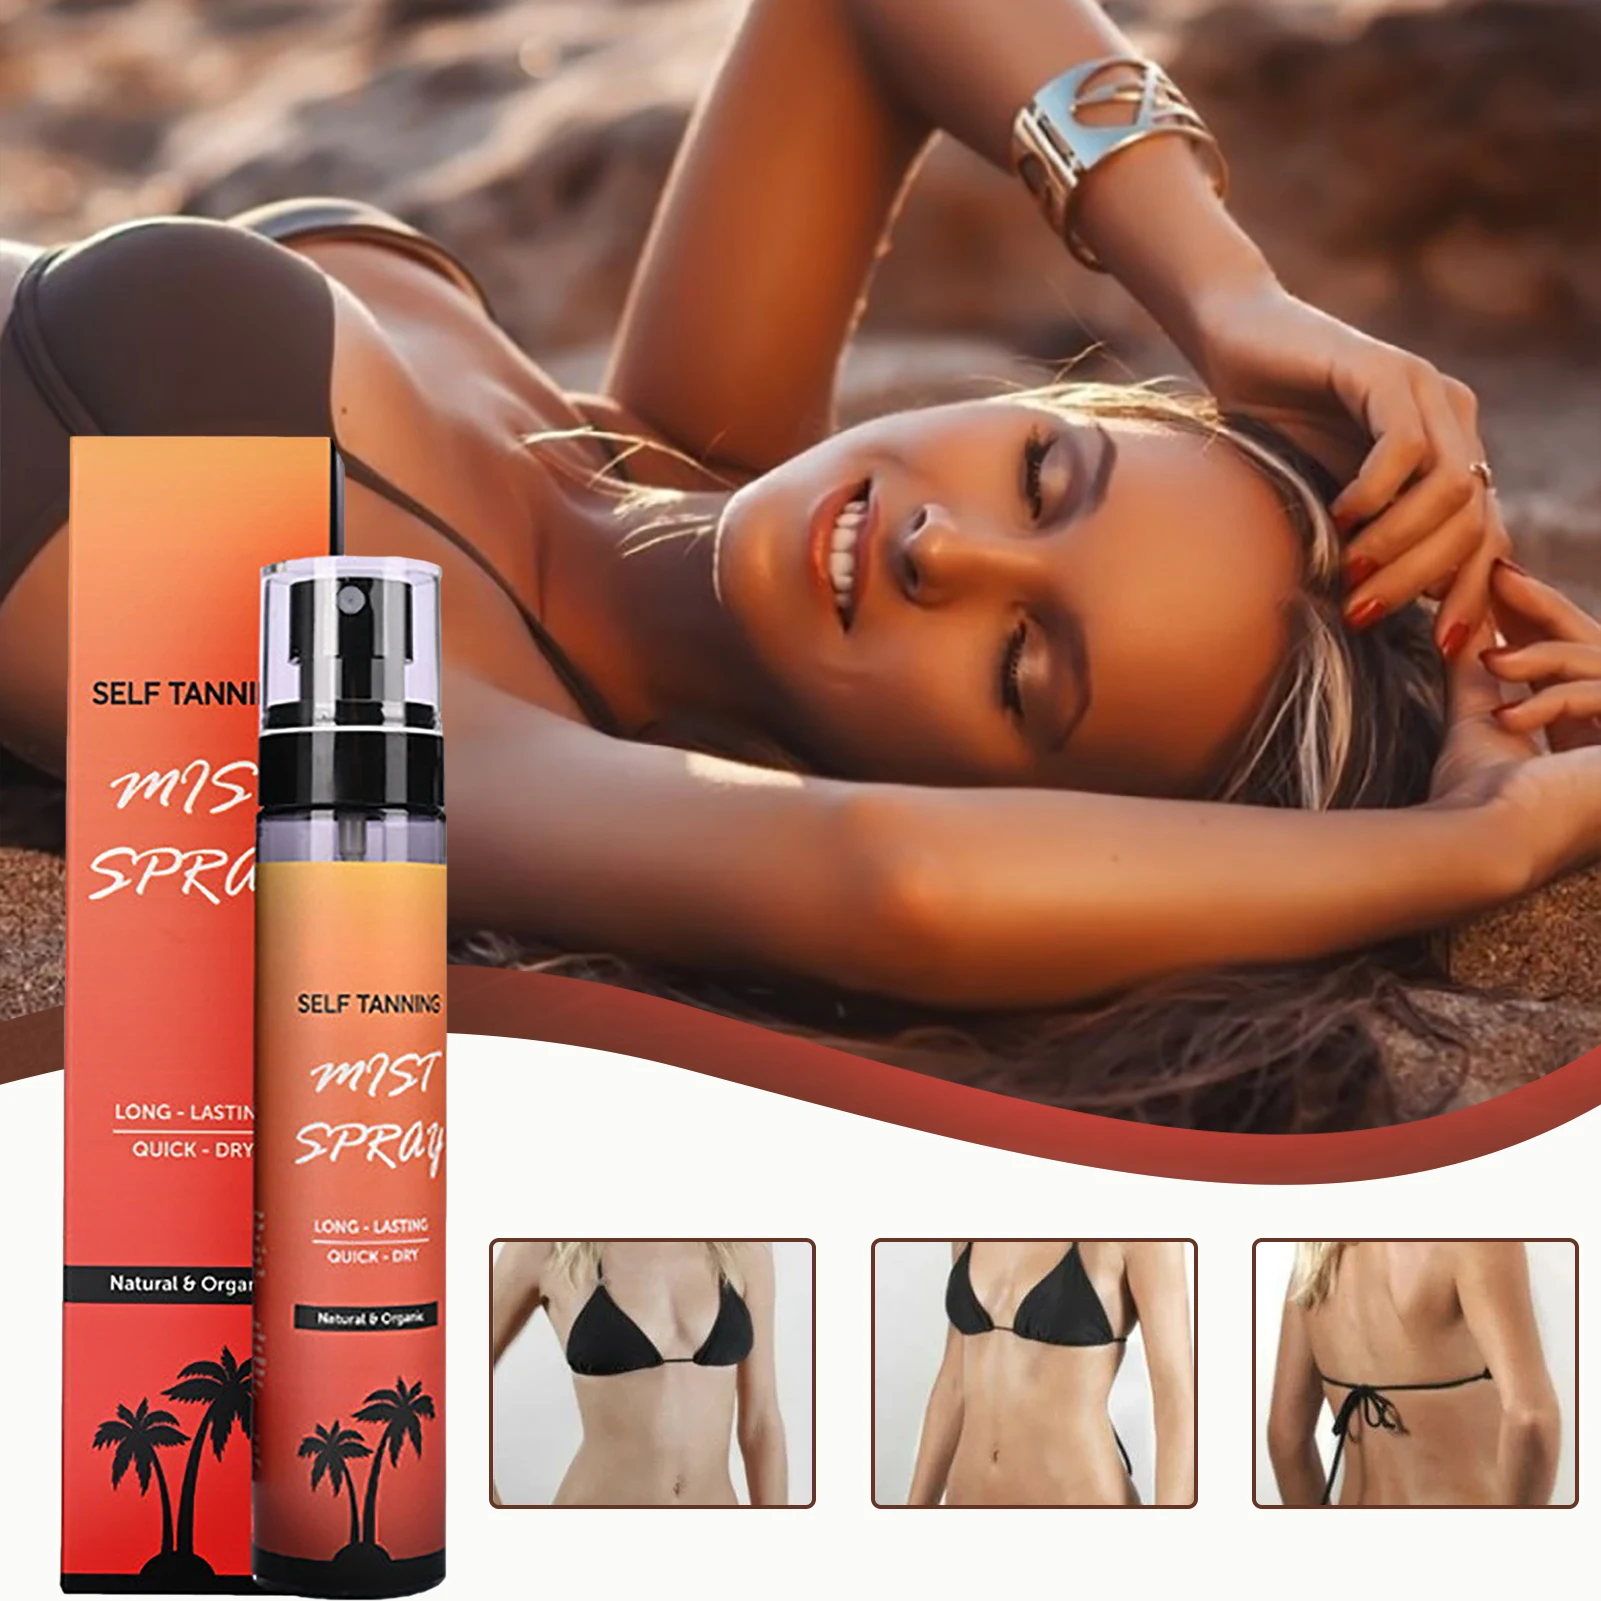 

Self-Tanning Lotion Spray Spray Tan Tanning Mousse for Women Men Teenagers Tan Physics Self-Tanner Instant Sunless Tanning Spray